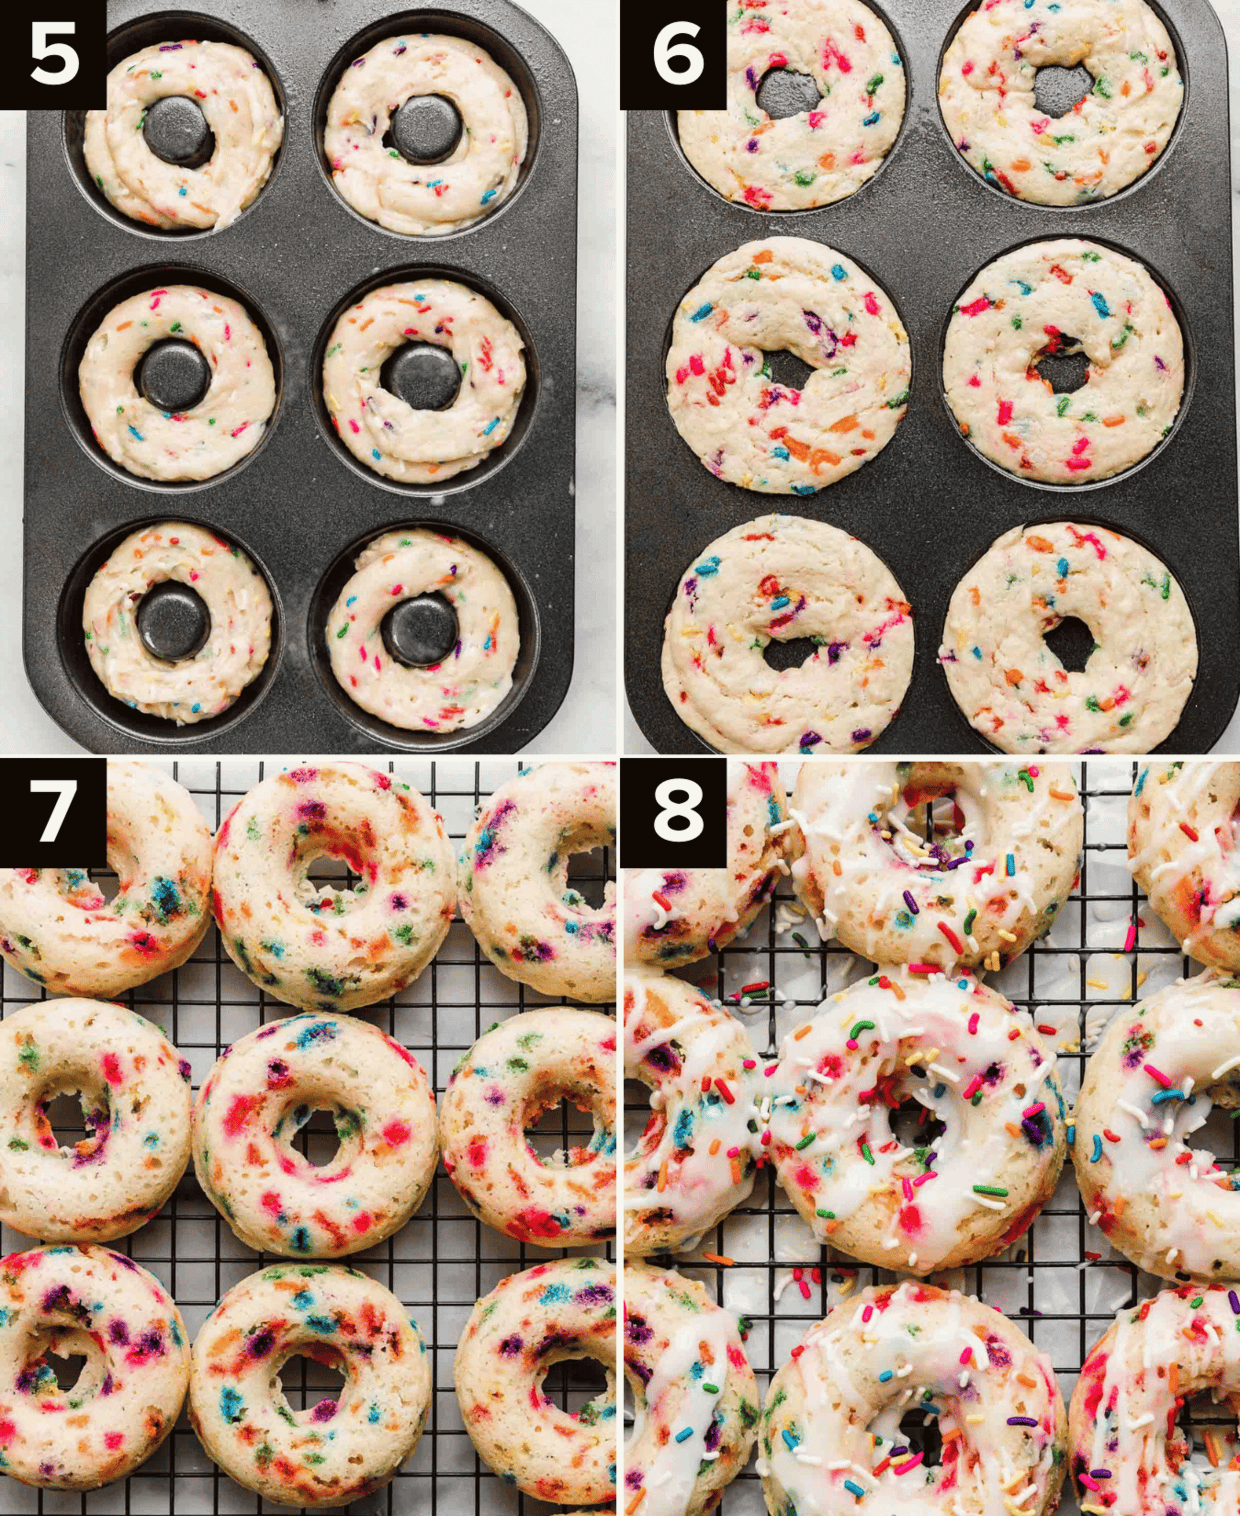 Four images, top left is funfetti donut batter in donut pan, top right is baked funfetti donuts in a donut pan, bottom left is sprinkle donuts on a cooling rack, bottom right is glaze covered funfetti donuts.